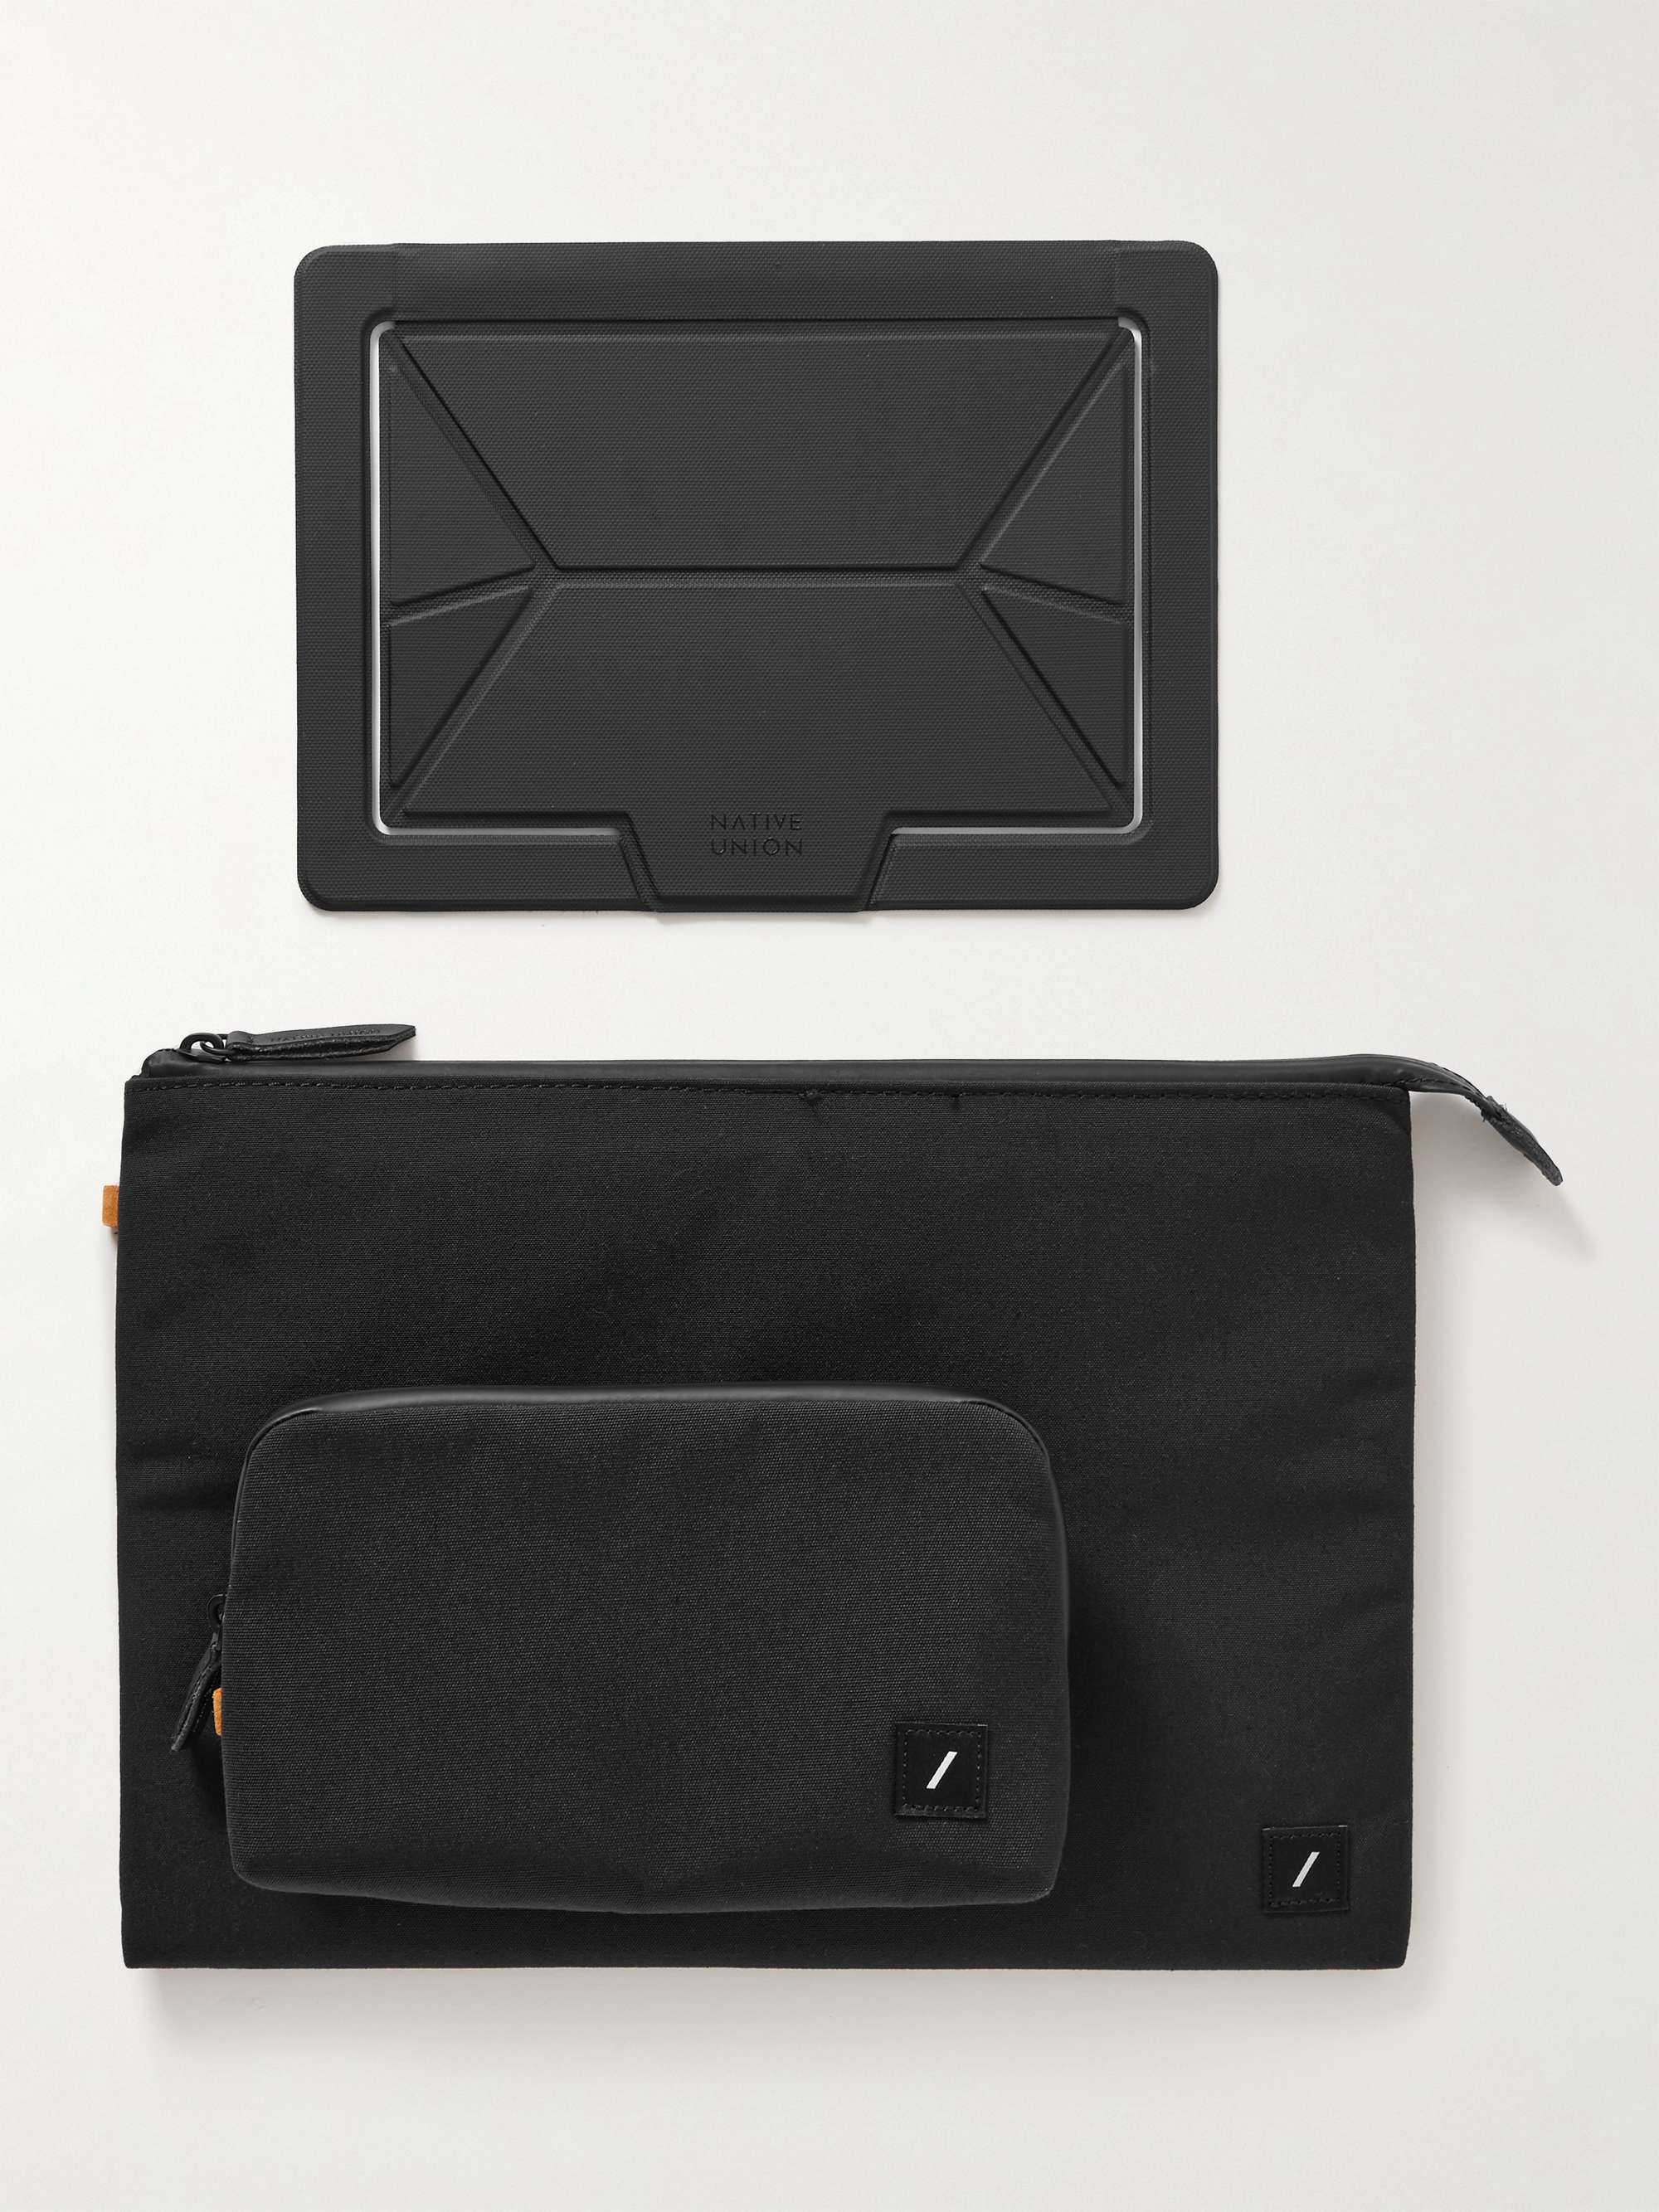 NATIVE UNION W.F.A Laptop Sleeve and Stand Bundle